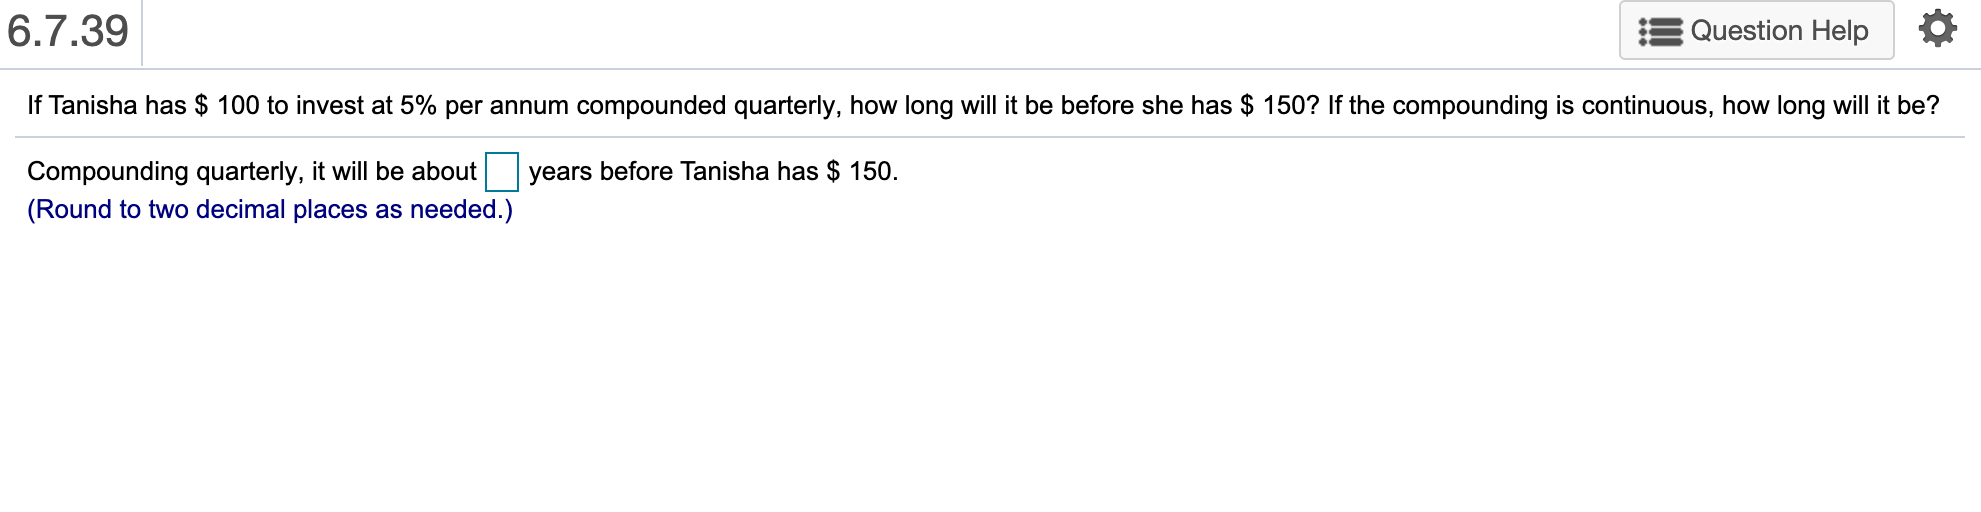 6.7.39
Question Help
If Tanisha has $ 100 to invest at 5% per annum compounded quarterly, how long will it be before she has $ 150? If the compounding is continuous, how long will it be?
Compounding quarterly, it will be about
years before Tanisha has $ 150.
(Round to two decimal places as needed.)
